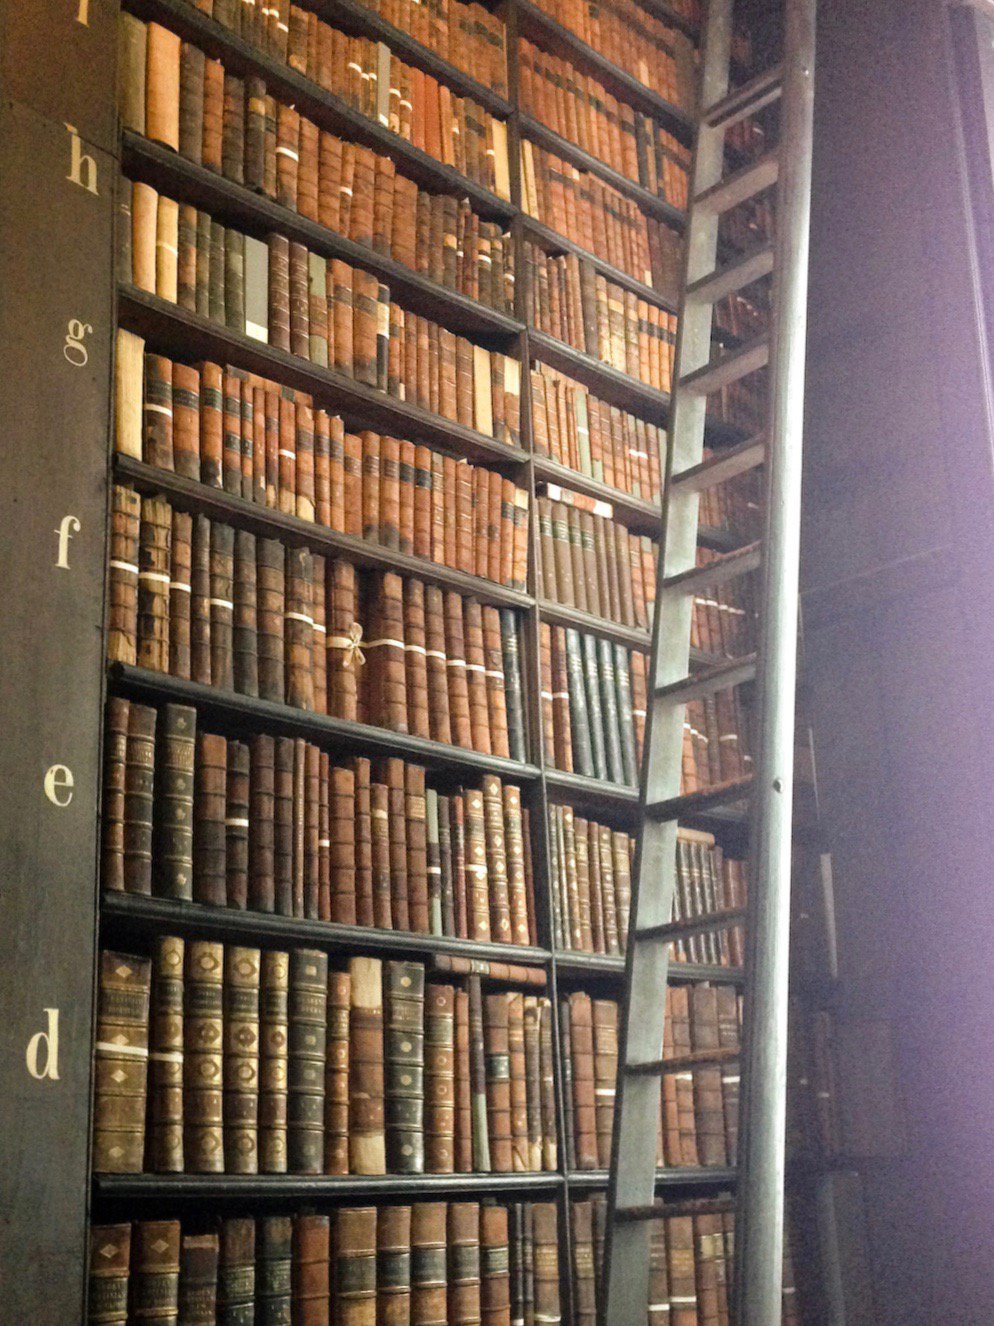 Lovely old books at Trinity College, Dublin (Eat Me. Drink Me.)